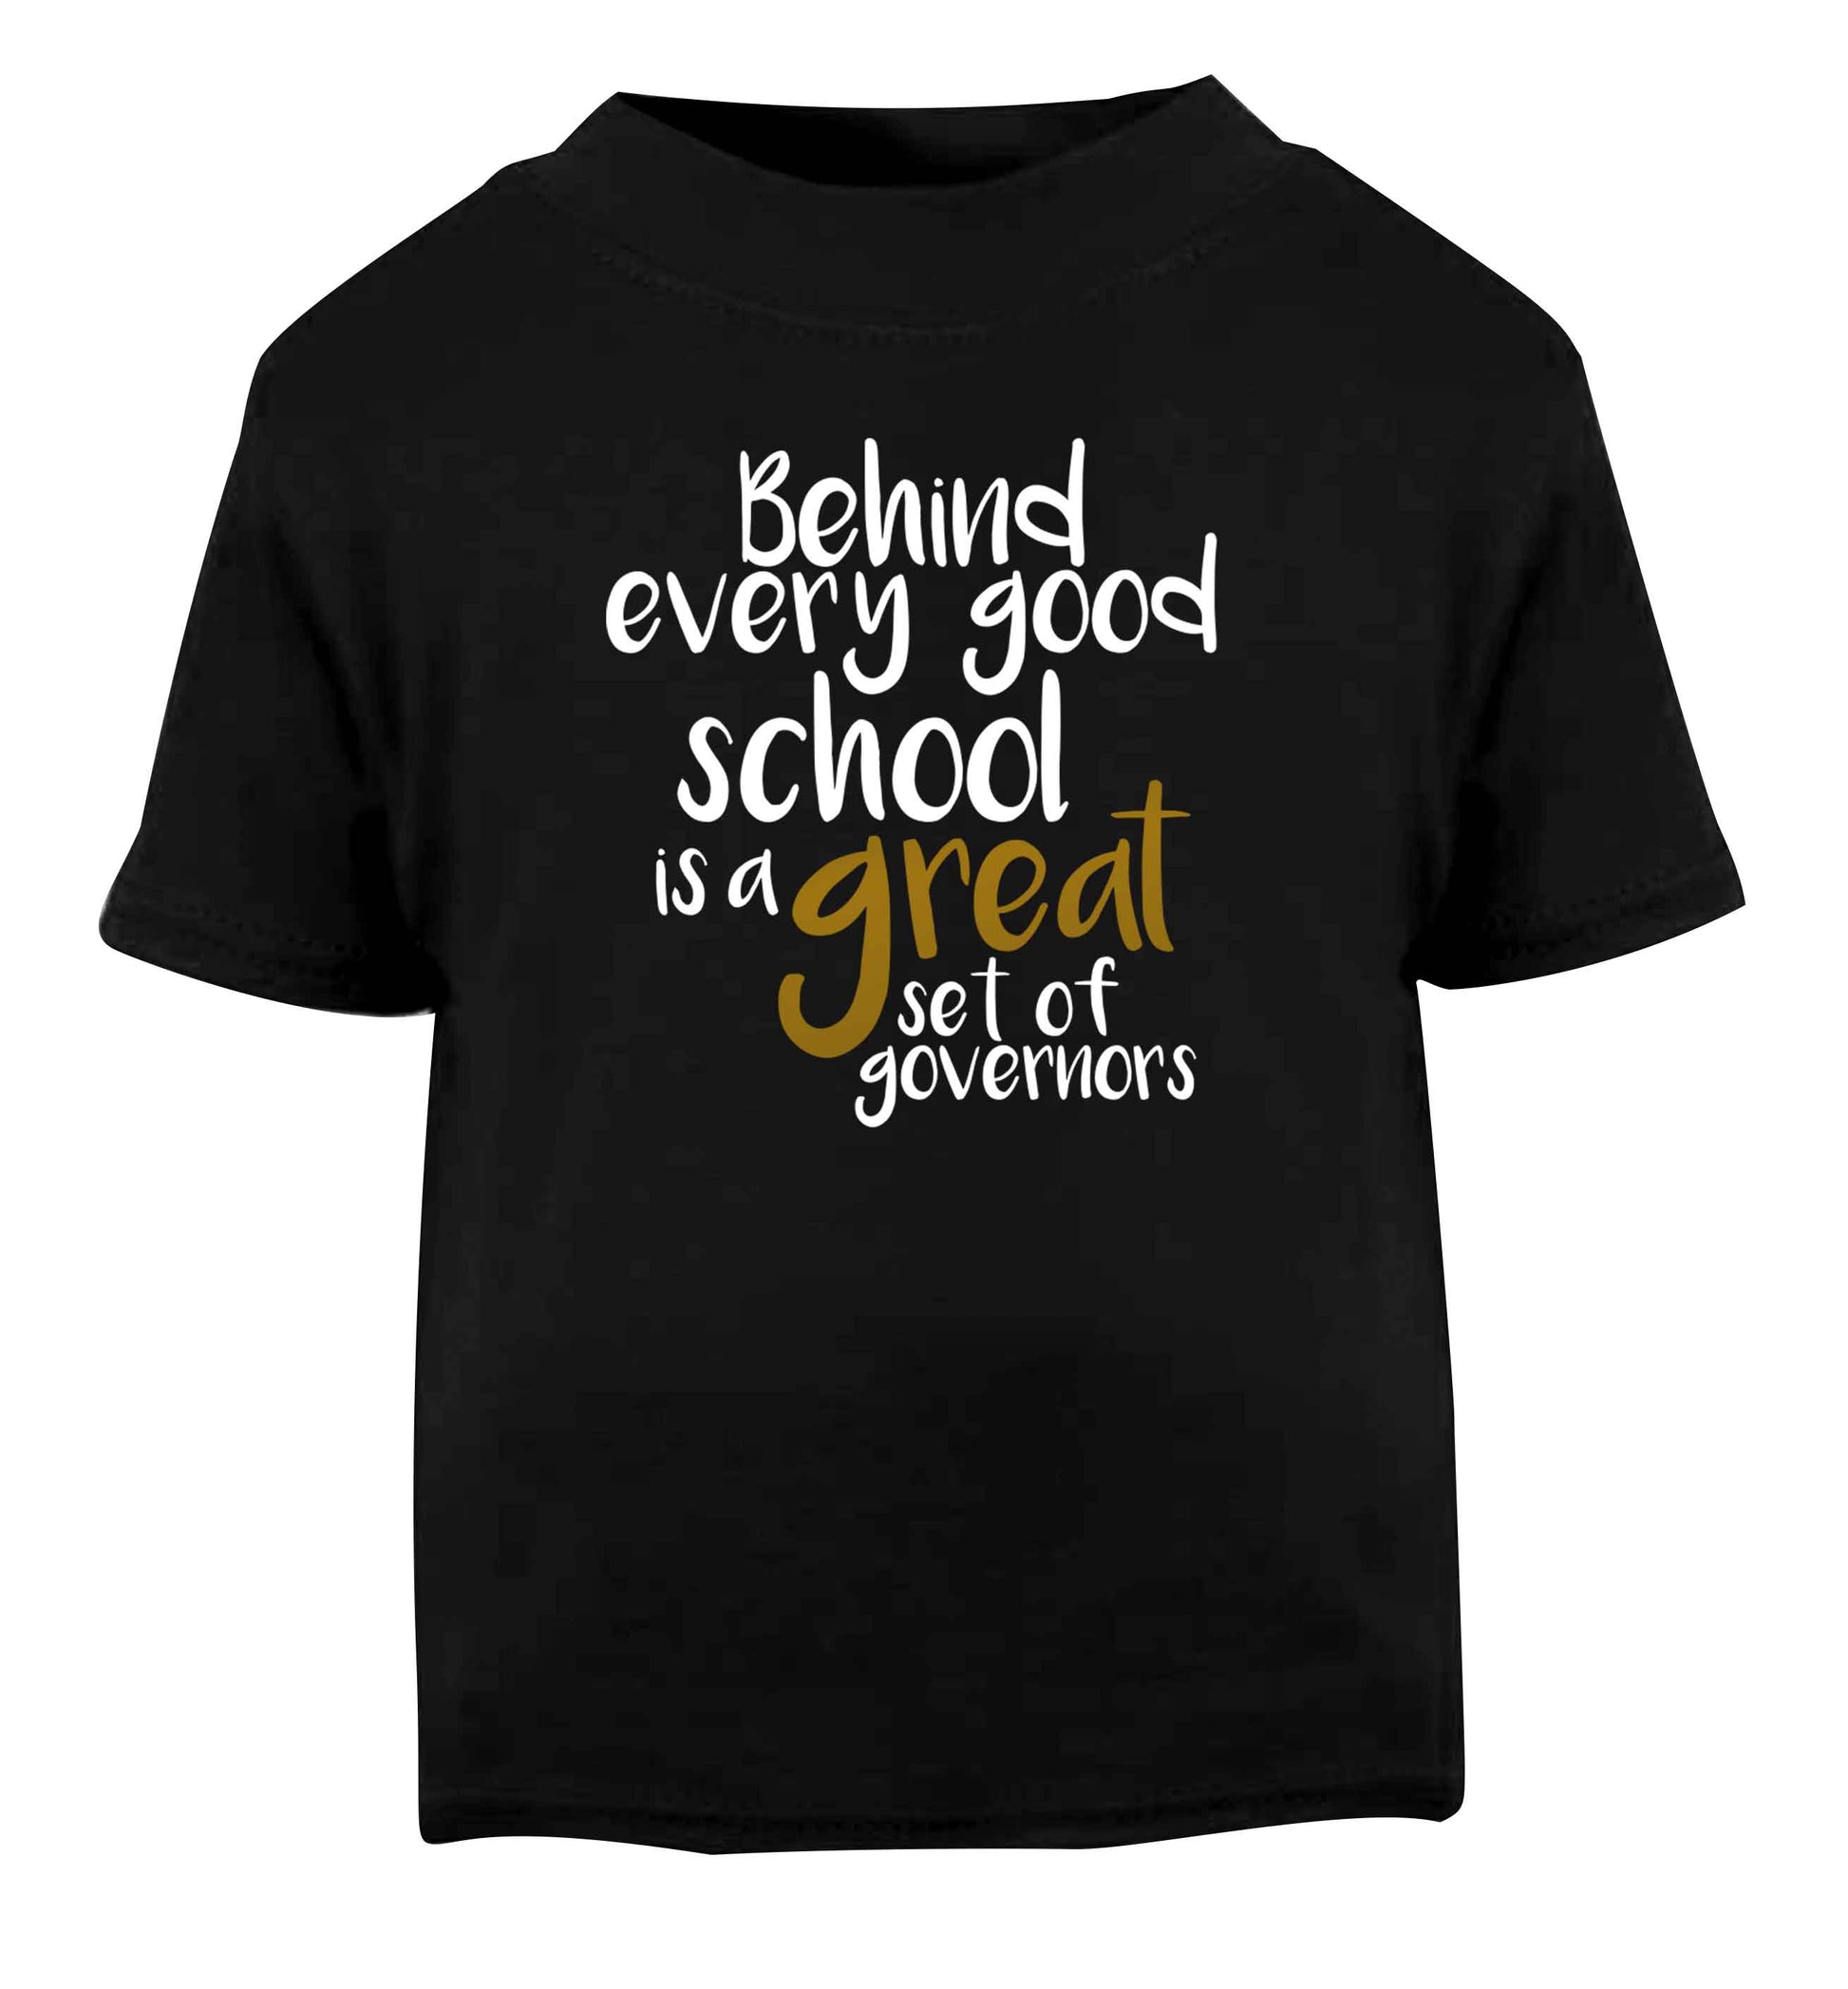 Behind every good school is a great set of governors Black Baby Toddler Tshirt 2 years